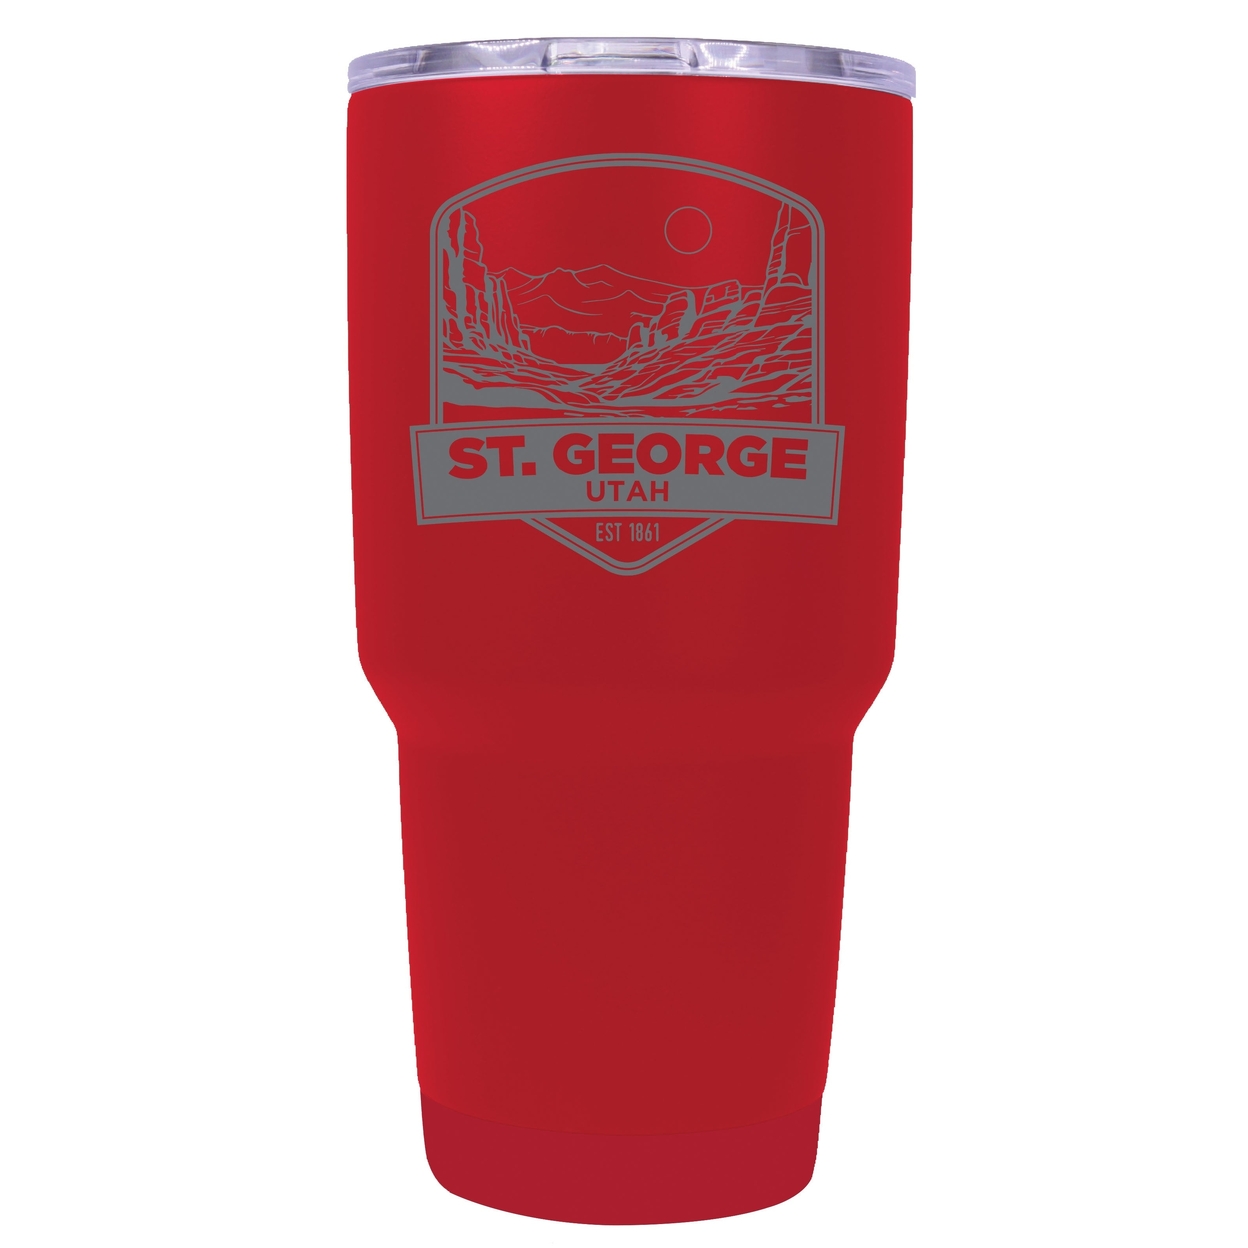 St. George Utah Souvenir 24 Oz Engraved Insulated Stainless Steel Tumbler - Red,,Single Unit